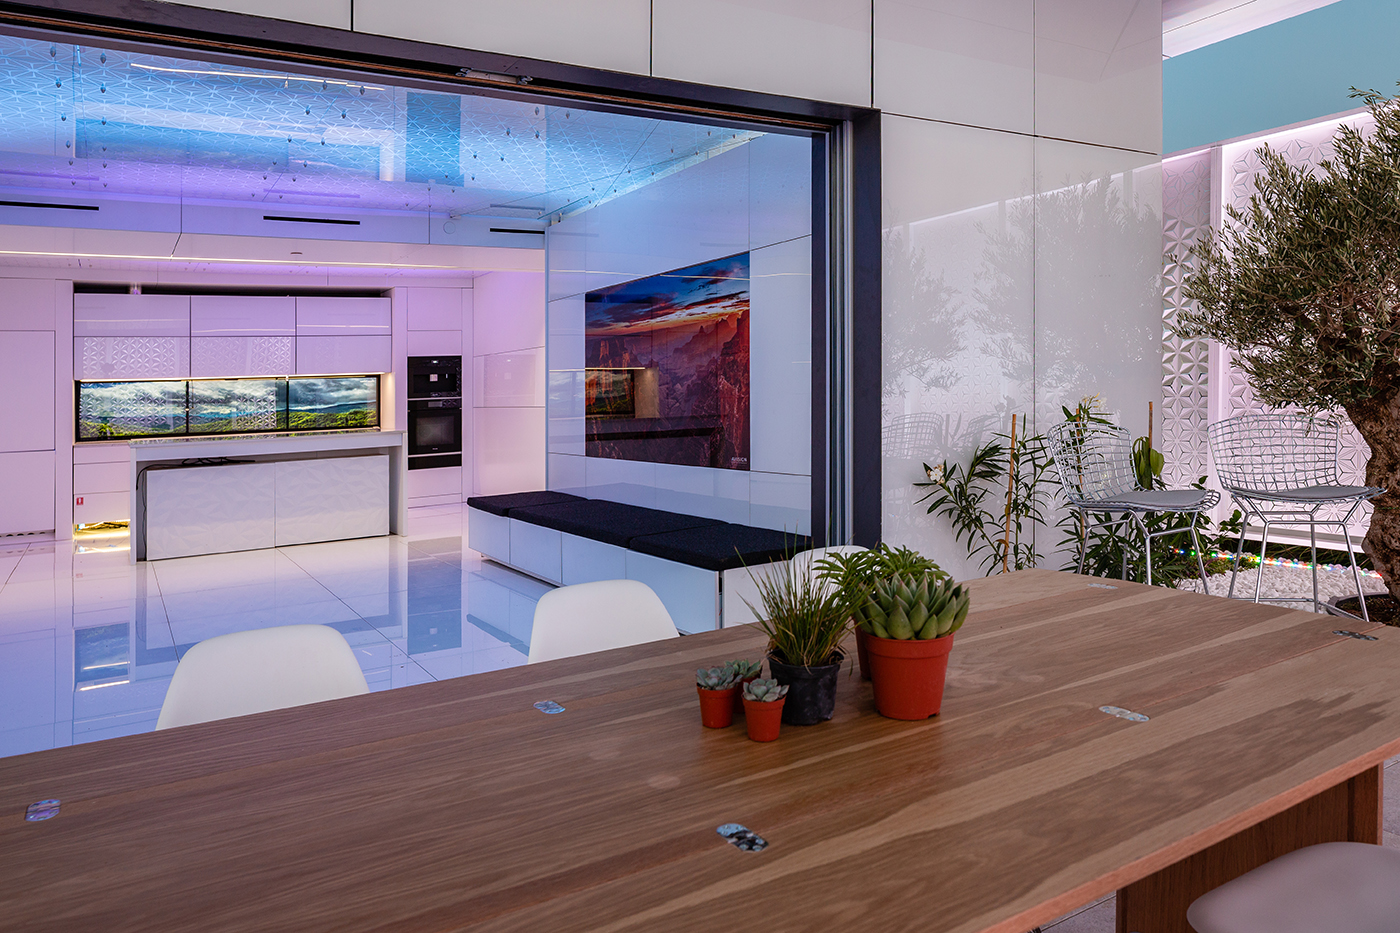 FutureHAUS kitchen with a dining table, energy-efficient cooking countertop and high-adjustable cabinets.